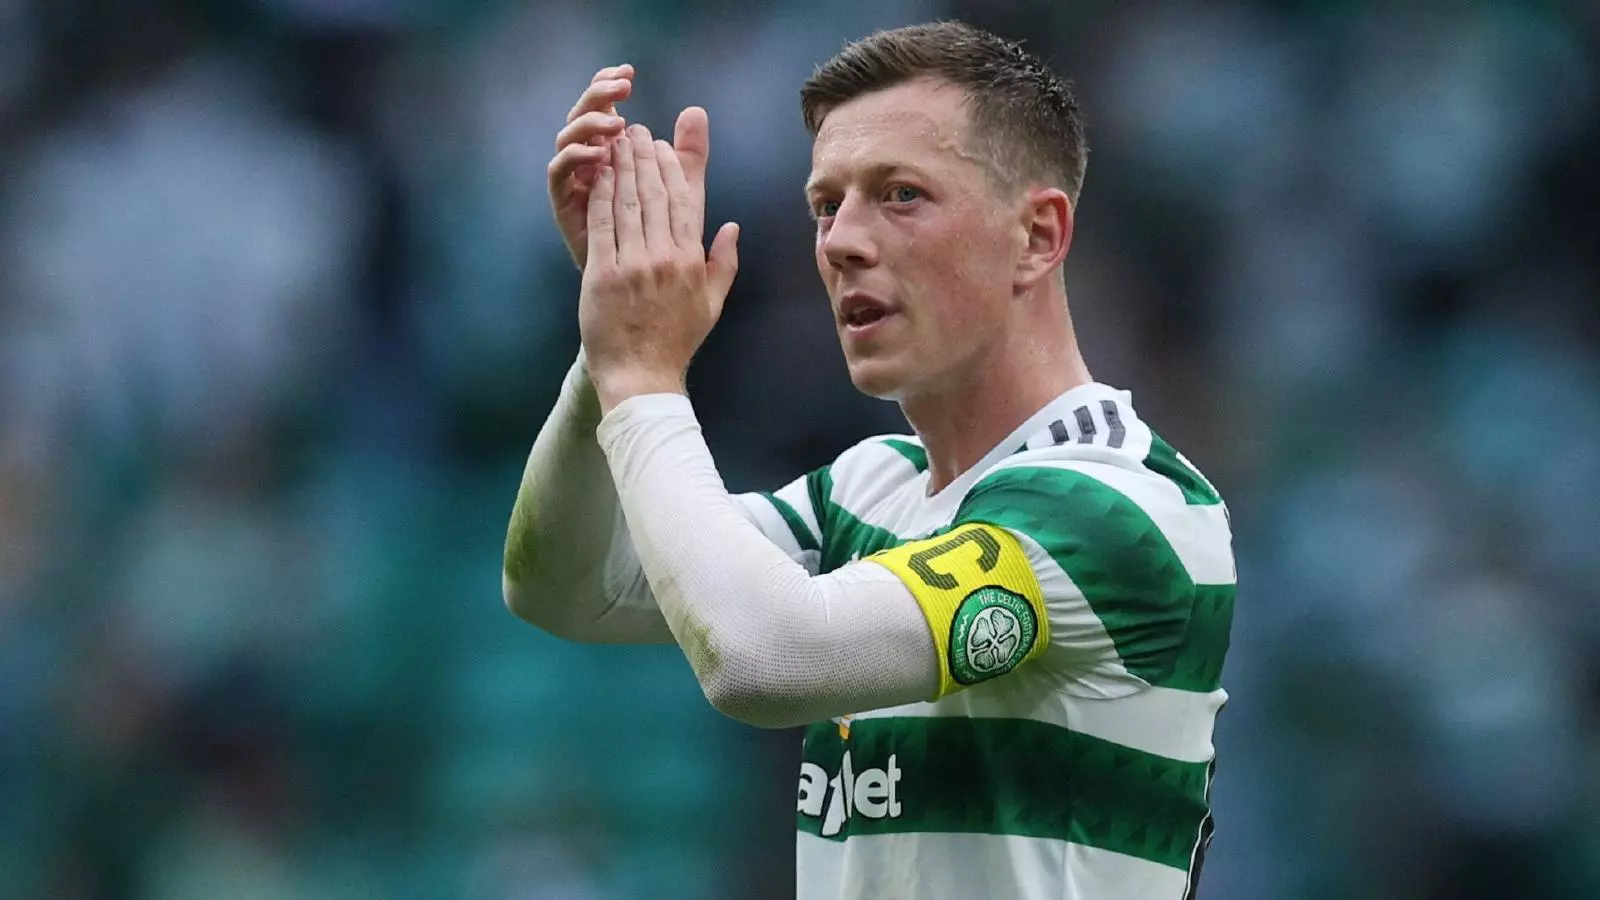 Callum McGregor says he will play for Celtic as long as he is able